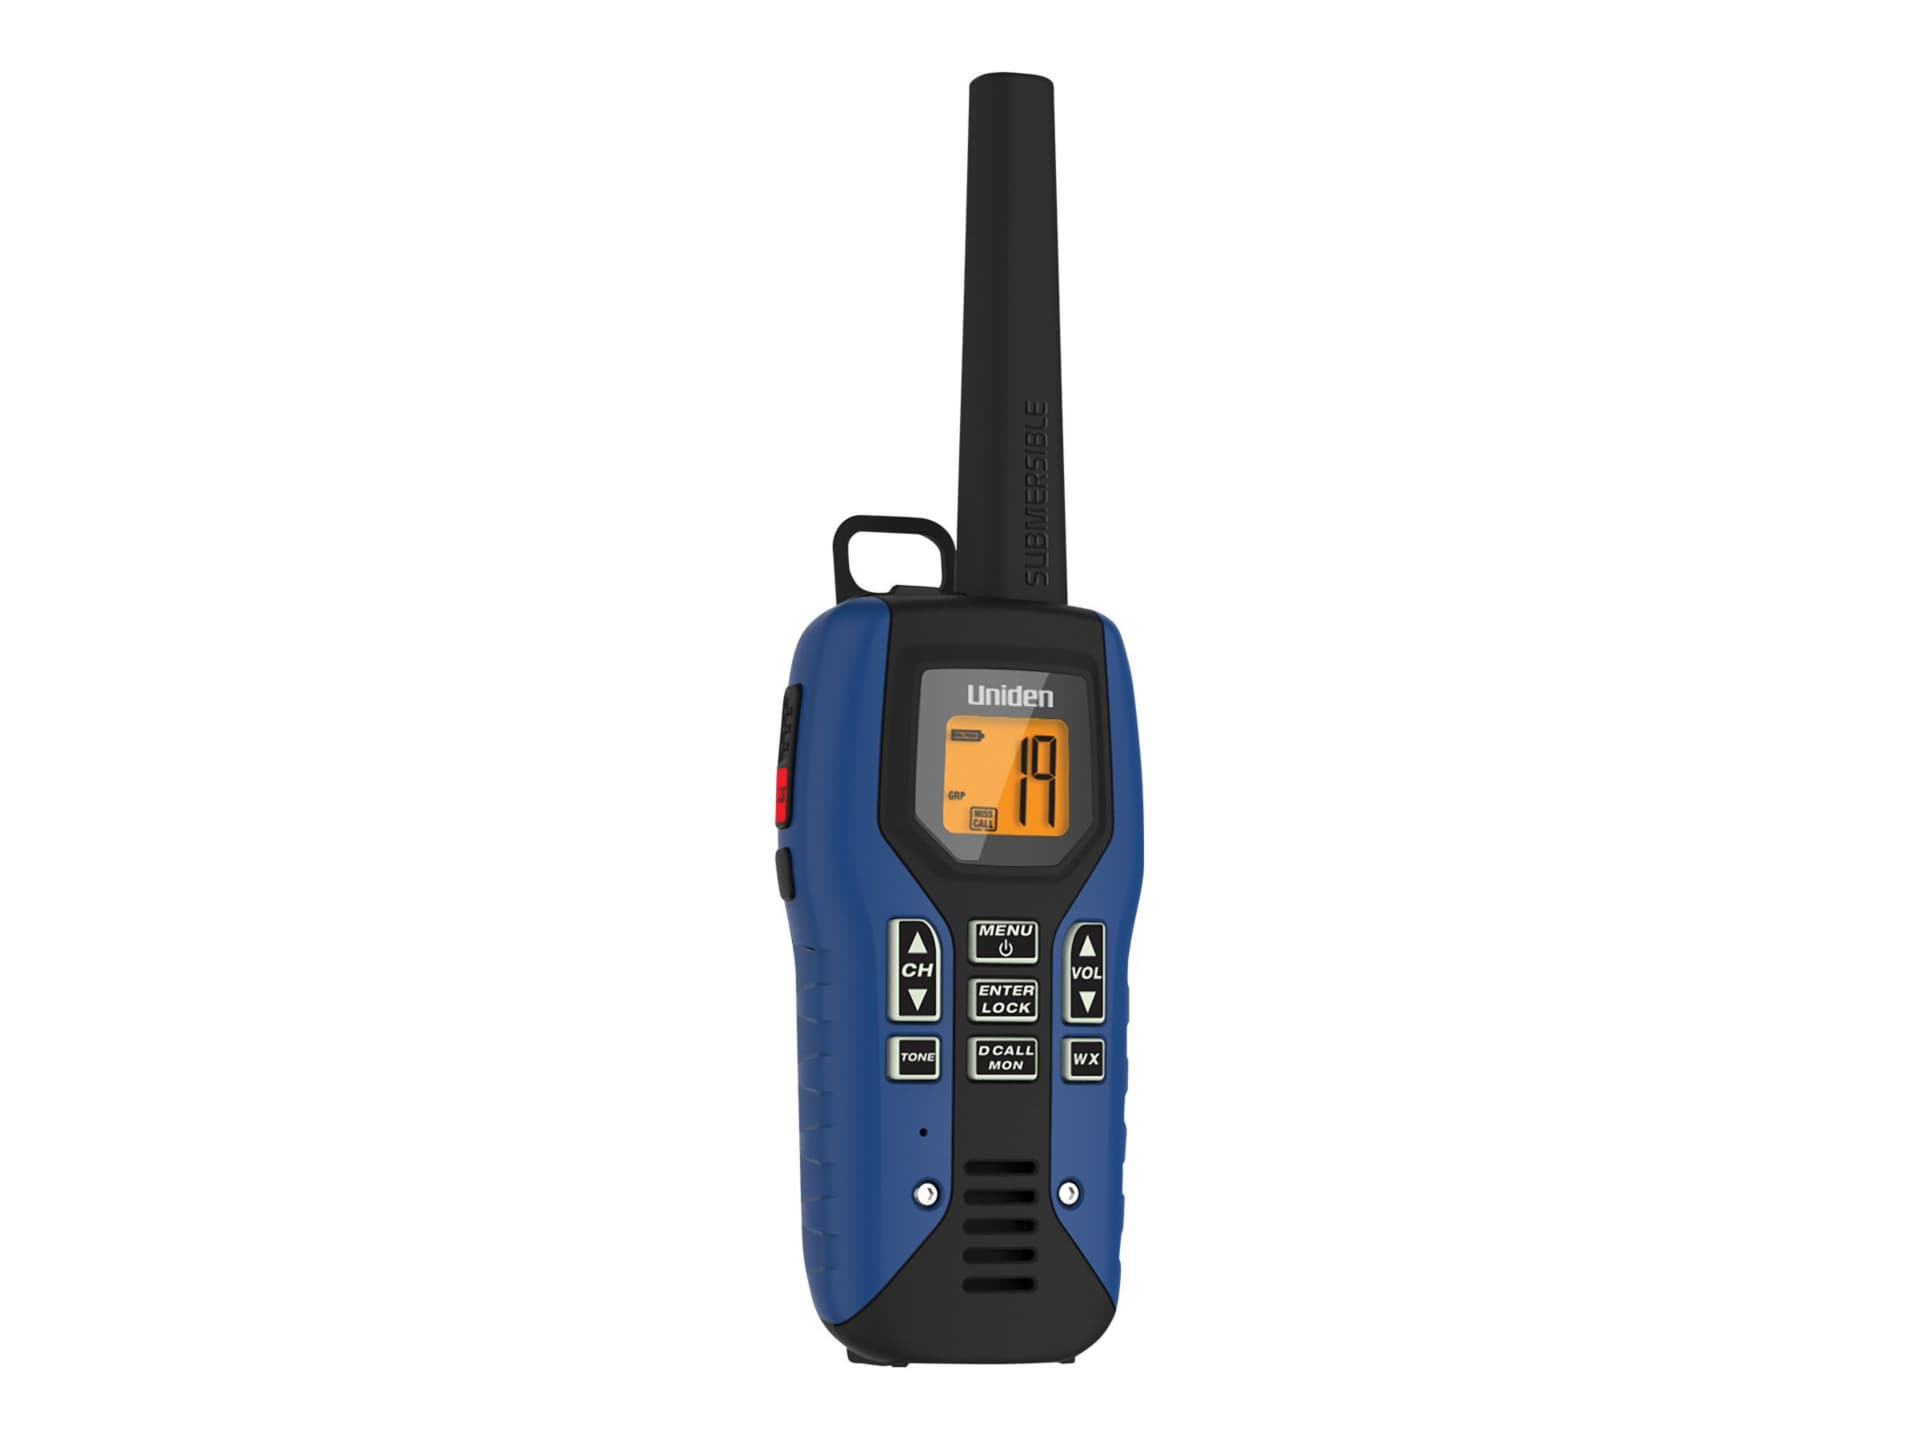 Uniden GMR5095-2CKHS two-way radio - FRS/GMRS